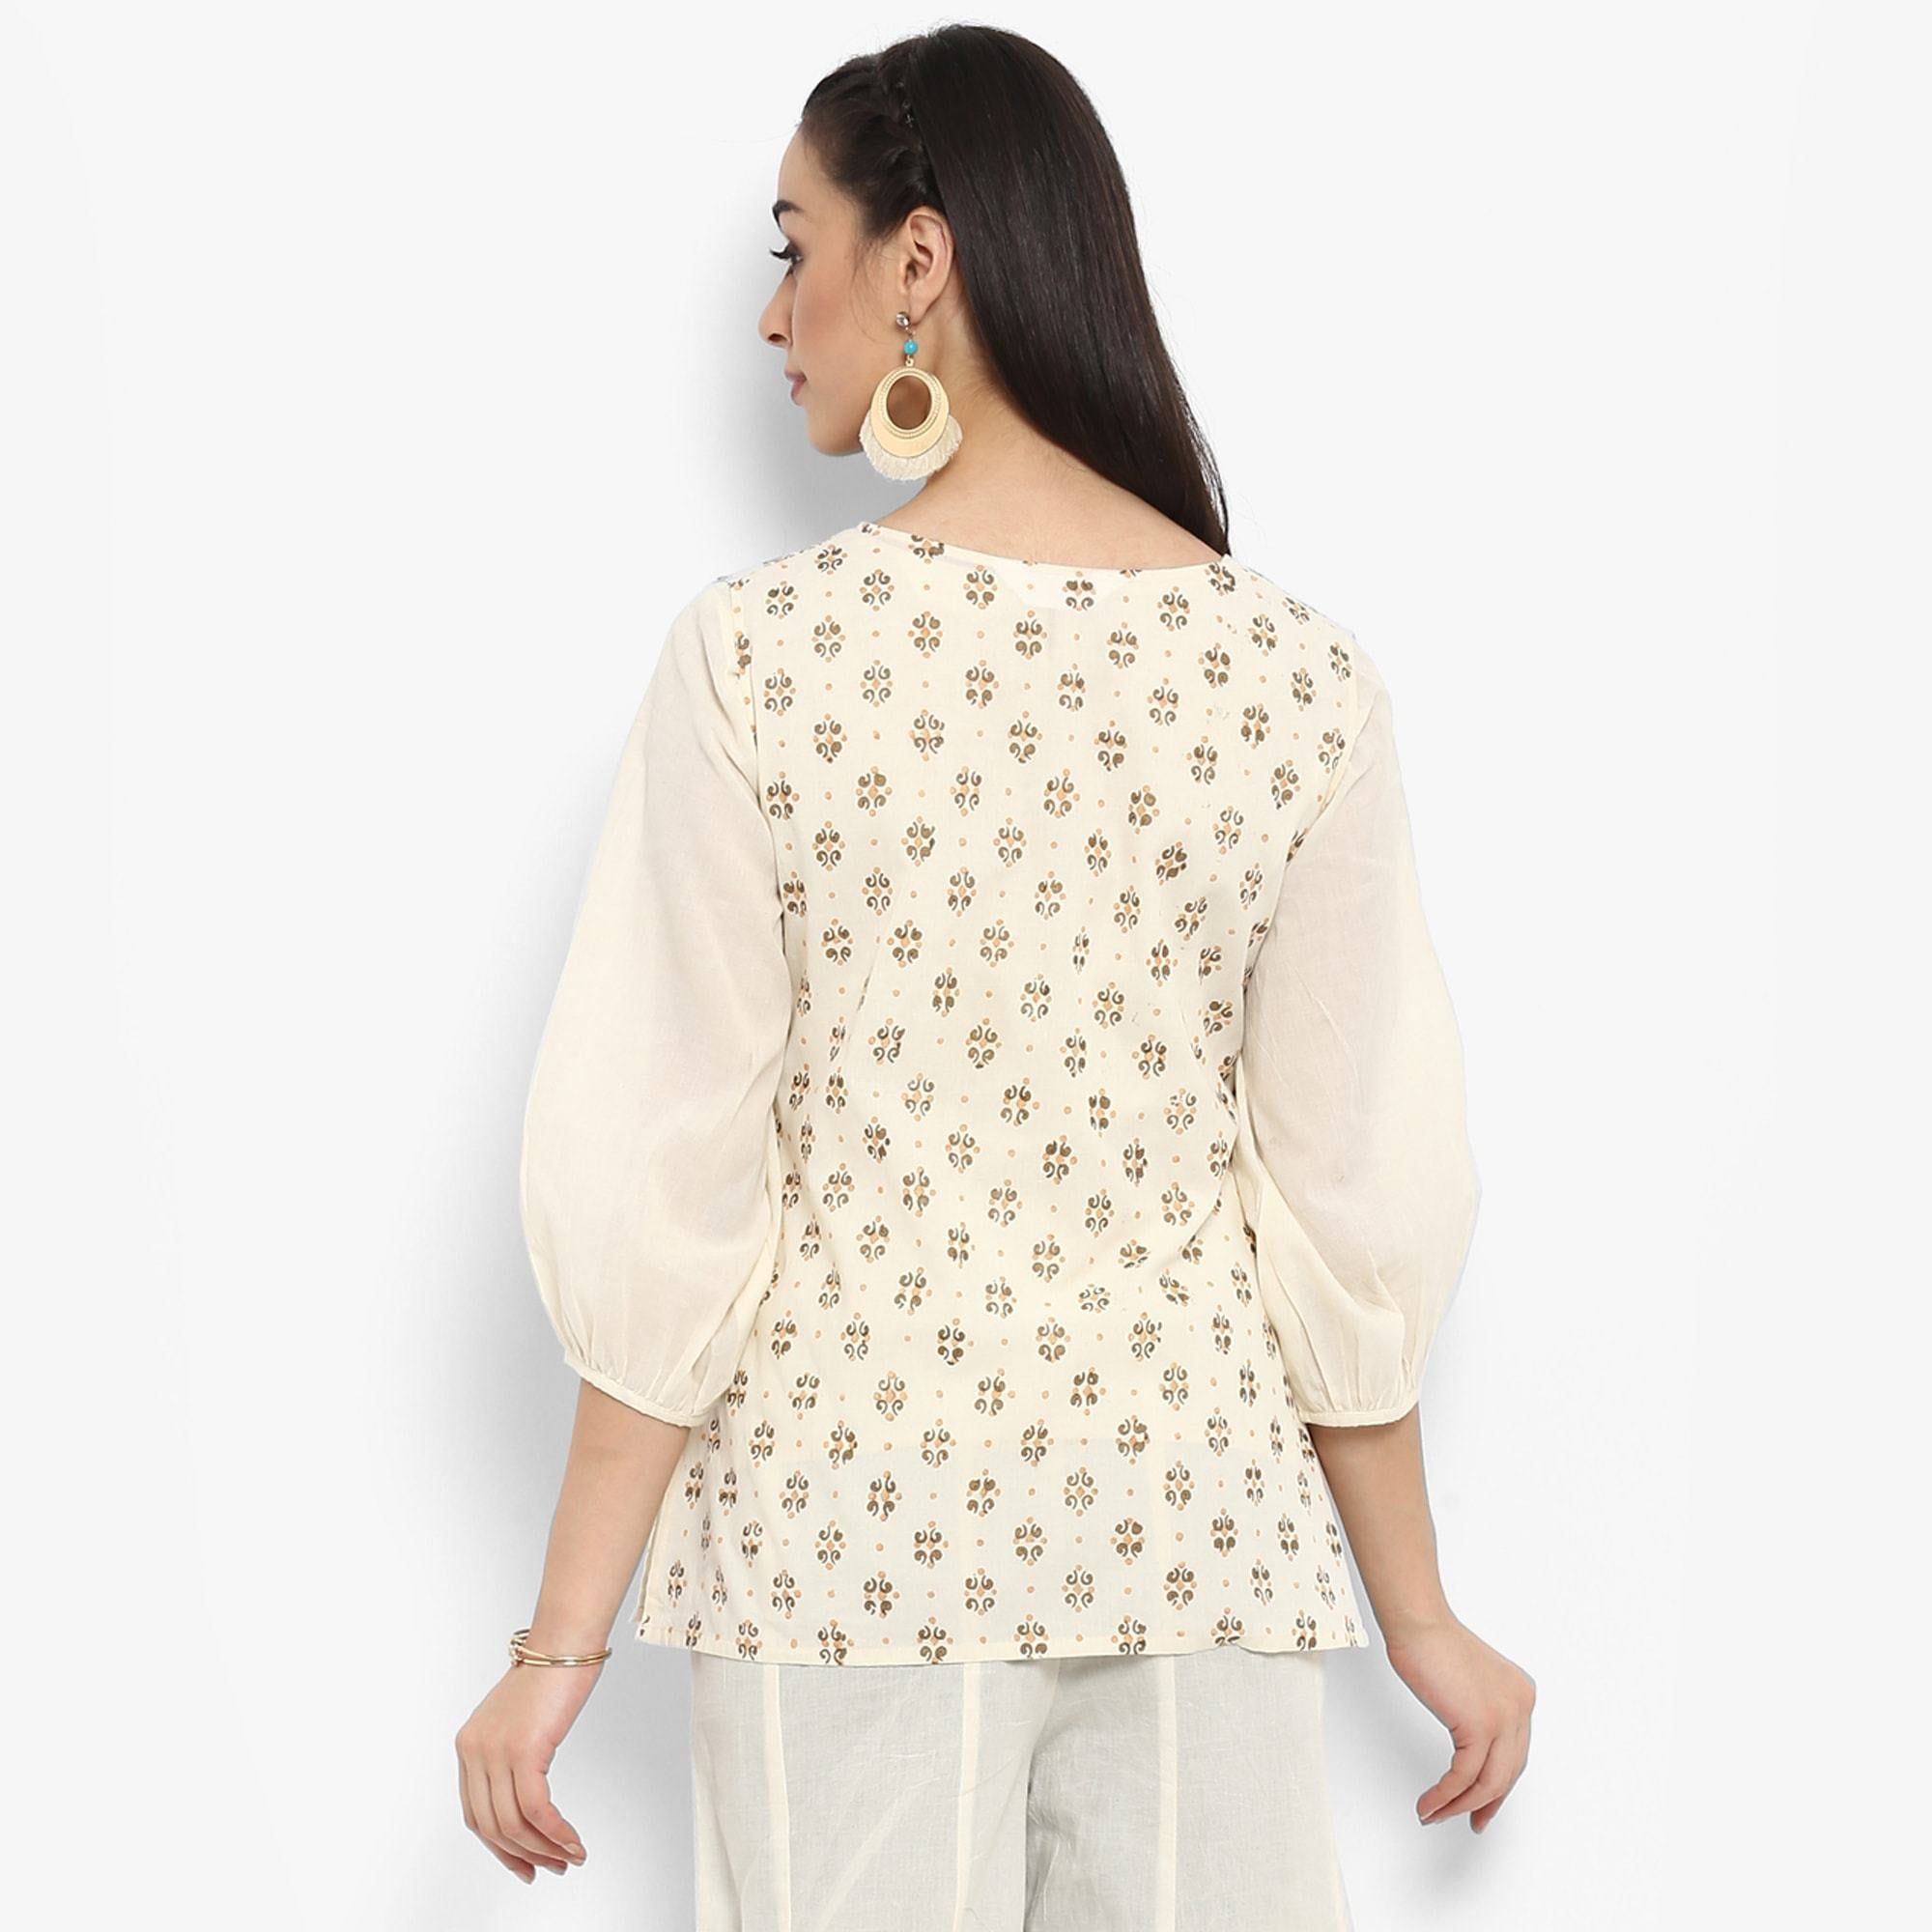 Women's Block Printed Top With Waistcoat - Pannkh